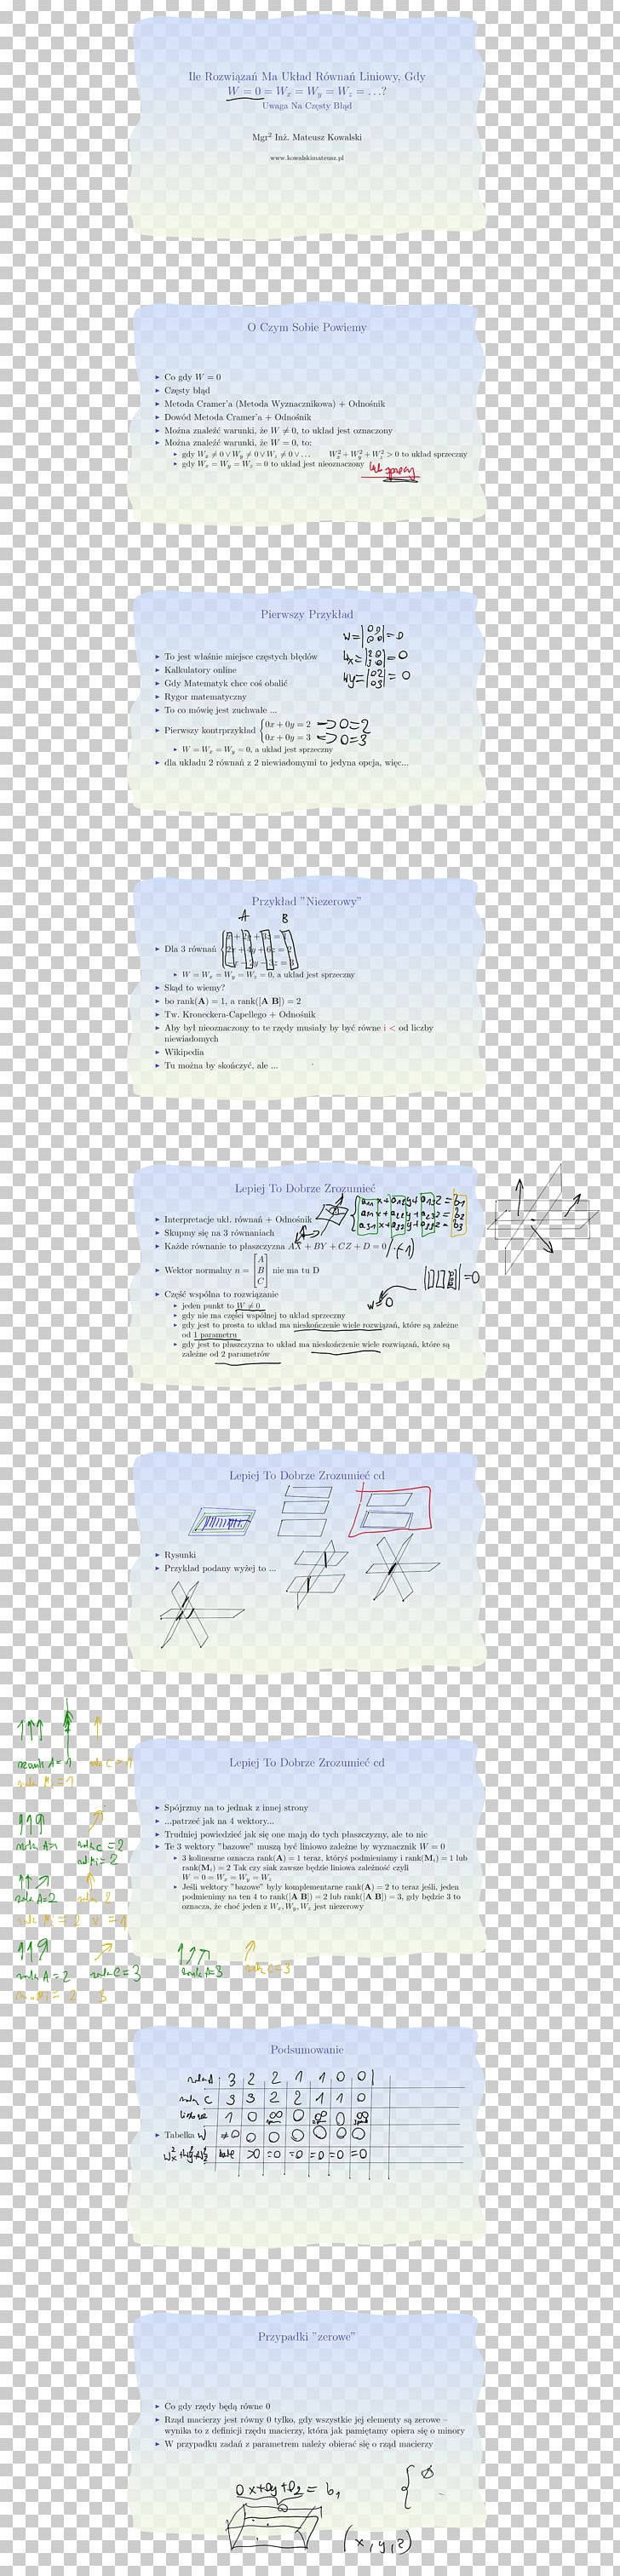 Document Line Angle Sky Plc PNG, Clipart, Angle, Art, Blue, Document, Line Free PNG Download